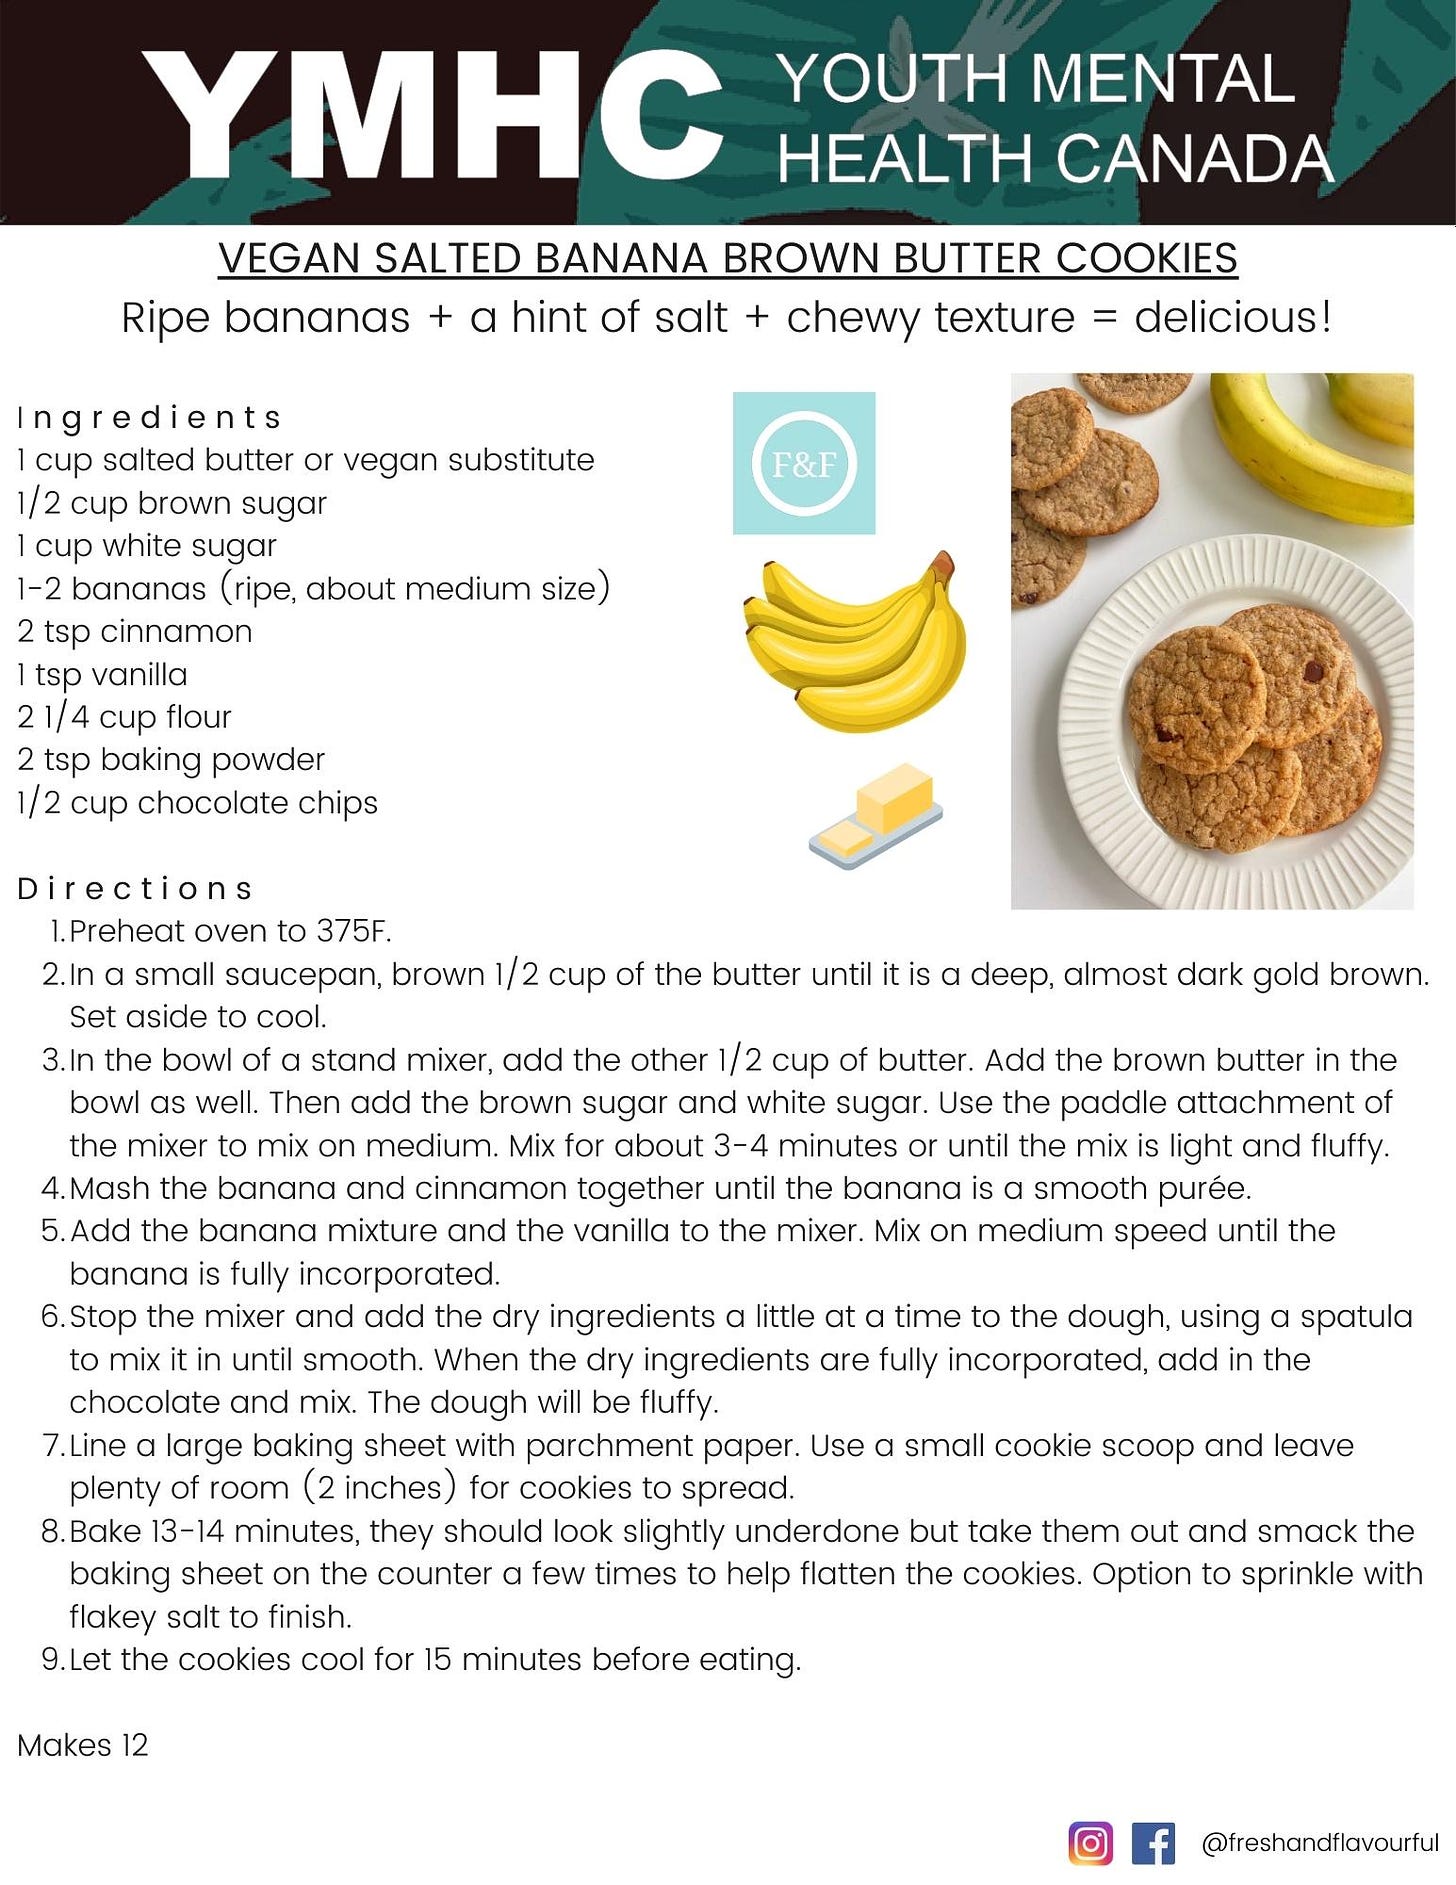 VEGAN SALTED BANANA BROWN BUTTER COOKIES Ripe bananas + a hint of salt + chewy texture = delicious!  I n g r e d i e n t s 1 cup salted butter or vegan substitute 1/2 cup brown sugar  1 cup white sugar 1-2 bananas (ripe, about medium size) 2 tsp cinnamon 1 tsp vanilla  2 1/4 cup flour 2 tsp baking powder 1/2 cup chocolate chips   D i r e c t i o n s Preheat oven to 375F.  In a small saucepan, brown 1/2 cup of the butter until it is a deep, almost dark gold brown. Set aside to cool. In the bowl of a stand mixer, add the other 1/2 cup of butter. Add the brown butter in the bowl as well. Then add the brown sugar and white sugar. Use the paddle attachment of the mixer to mix on medium. Mix for about 3-4 minutes or until the mix is light and fluffy. Mash the banana and cinnamon together until the banana is a smooth purée.  Add the banana mixture and the vanilla to the mixer. Mix on medium speed until the banana is fully incorporated. Stop the mixer and add the dry ingredients a little at a time to the dough, using a spatula to mix it in until smooth. When the dry ingredients are fully incorporated, add in the chocolate and mix. The dough will be fluffy. Line a large baking sheet with parchment paper. Use a small cookie scoop and leave plenty of room (2 inches) for cookies to spread. Bake 13-14 minutes, they should look slightly underdone but take them out and smack the baking sheet on the counter a few times to help flatten the cookies. Option to sprinkle with flakey salt to finish. Let the cookies cool for 15 minutes before eating.  Makes 12